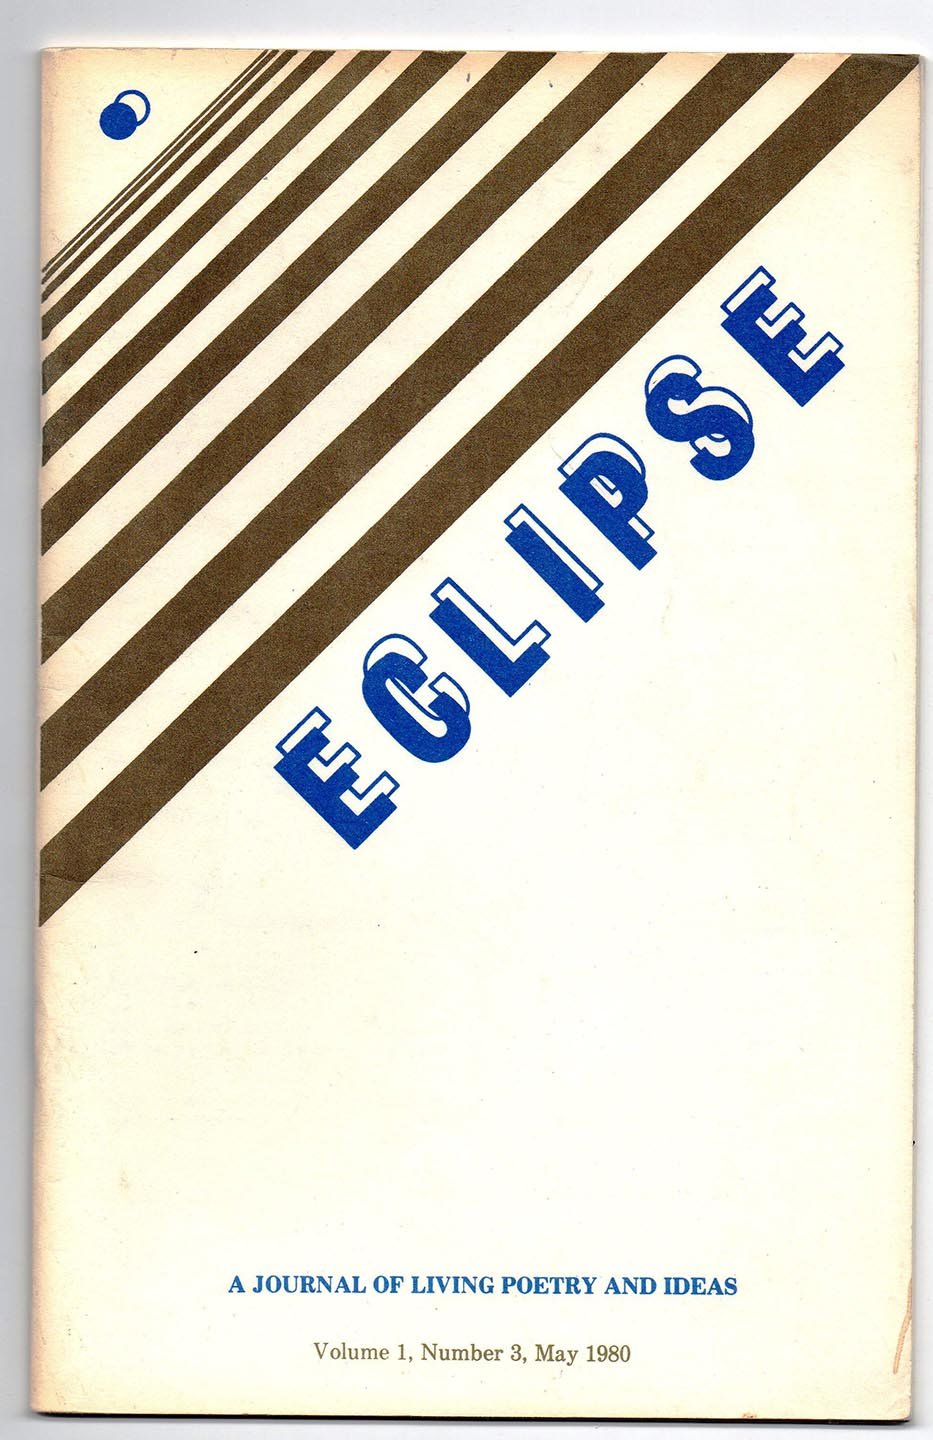 Eclipse: A Journal of Living Poetry and Ideas. May 1980